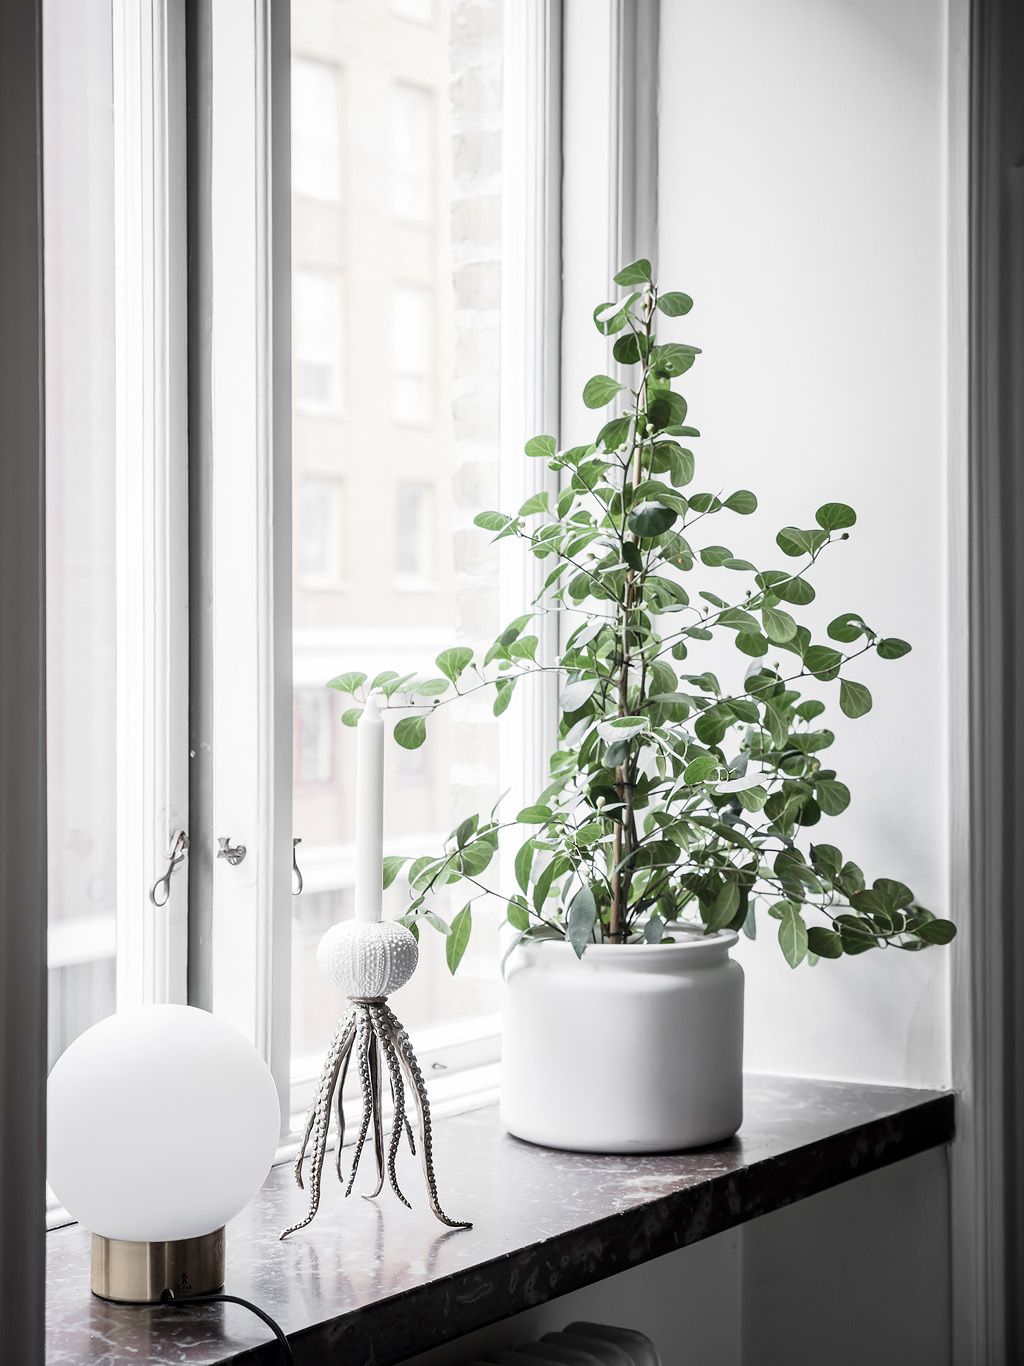 Enduring Trend of 2019 #2 Living form of Interior - Plants and Plant decor